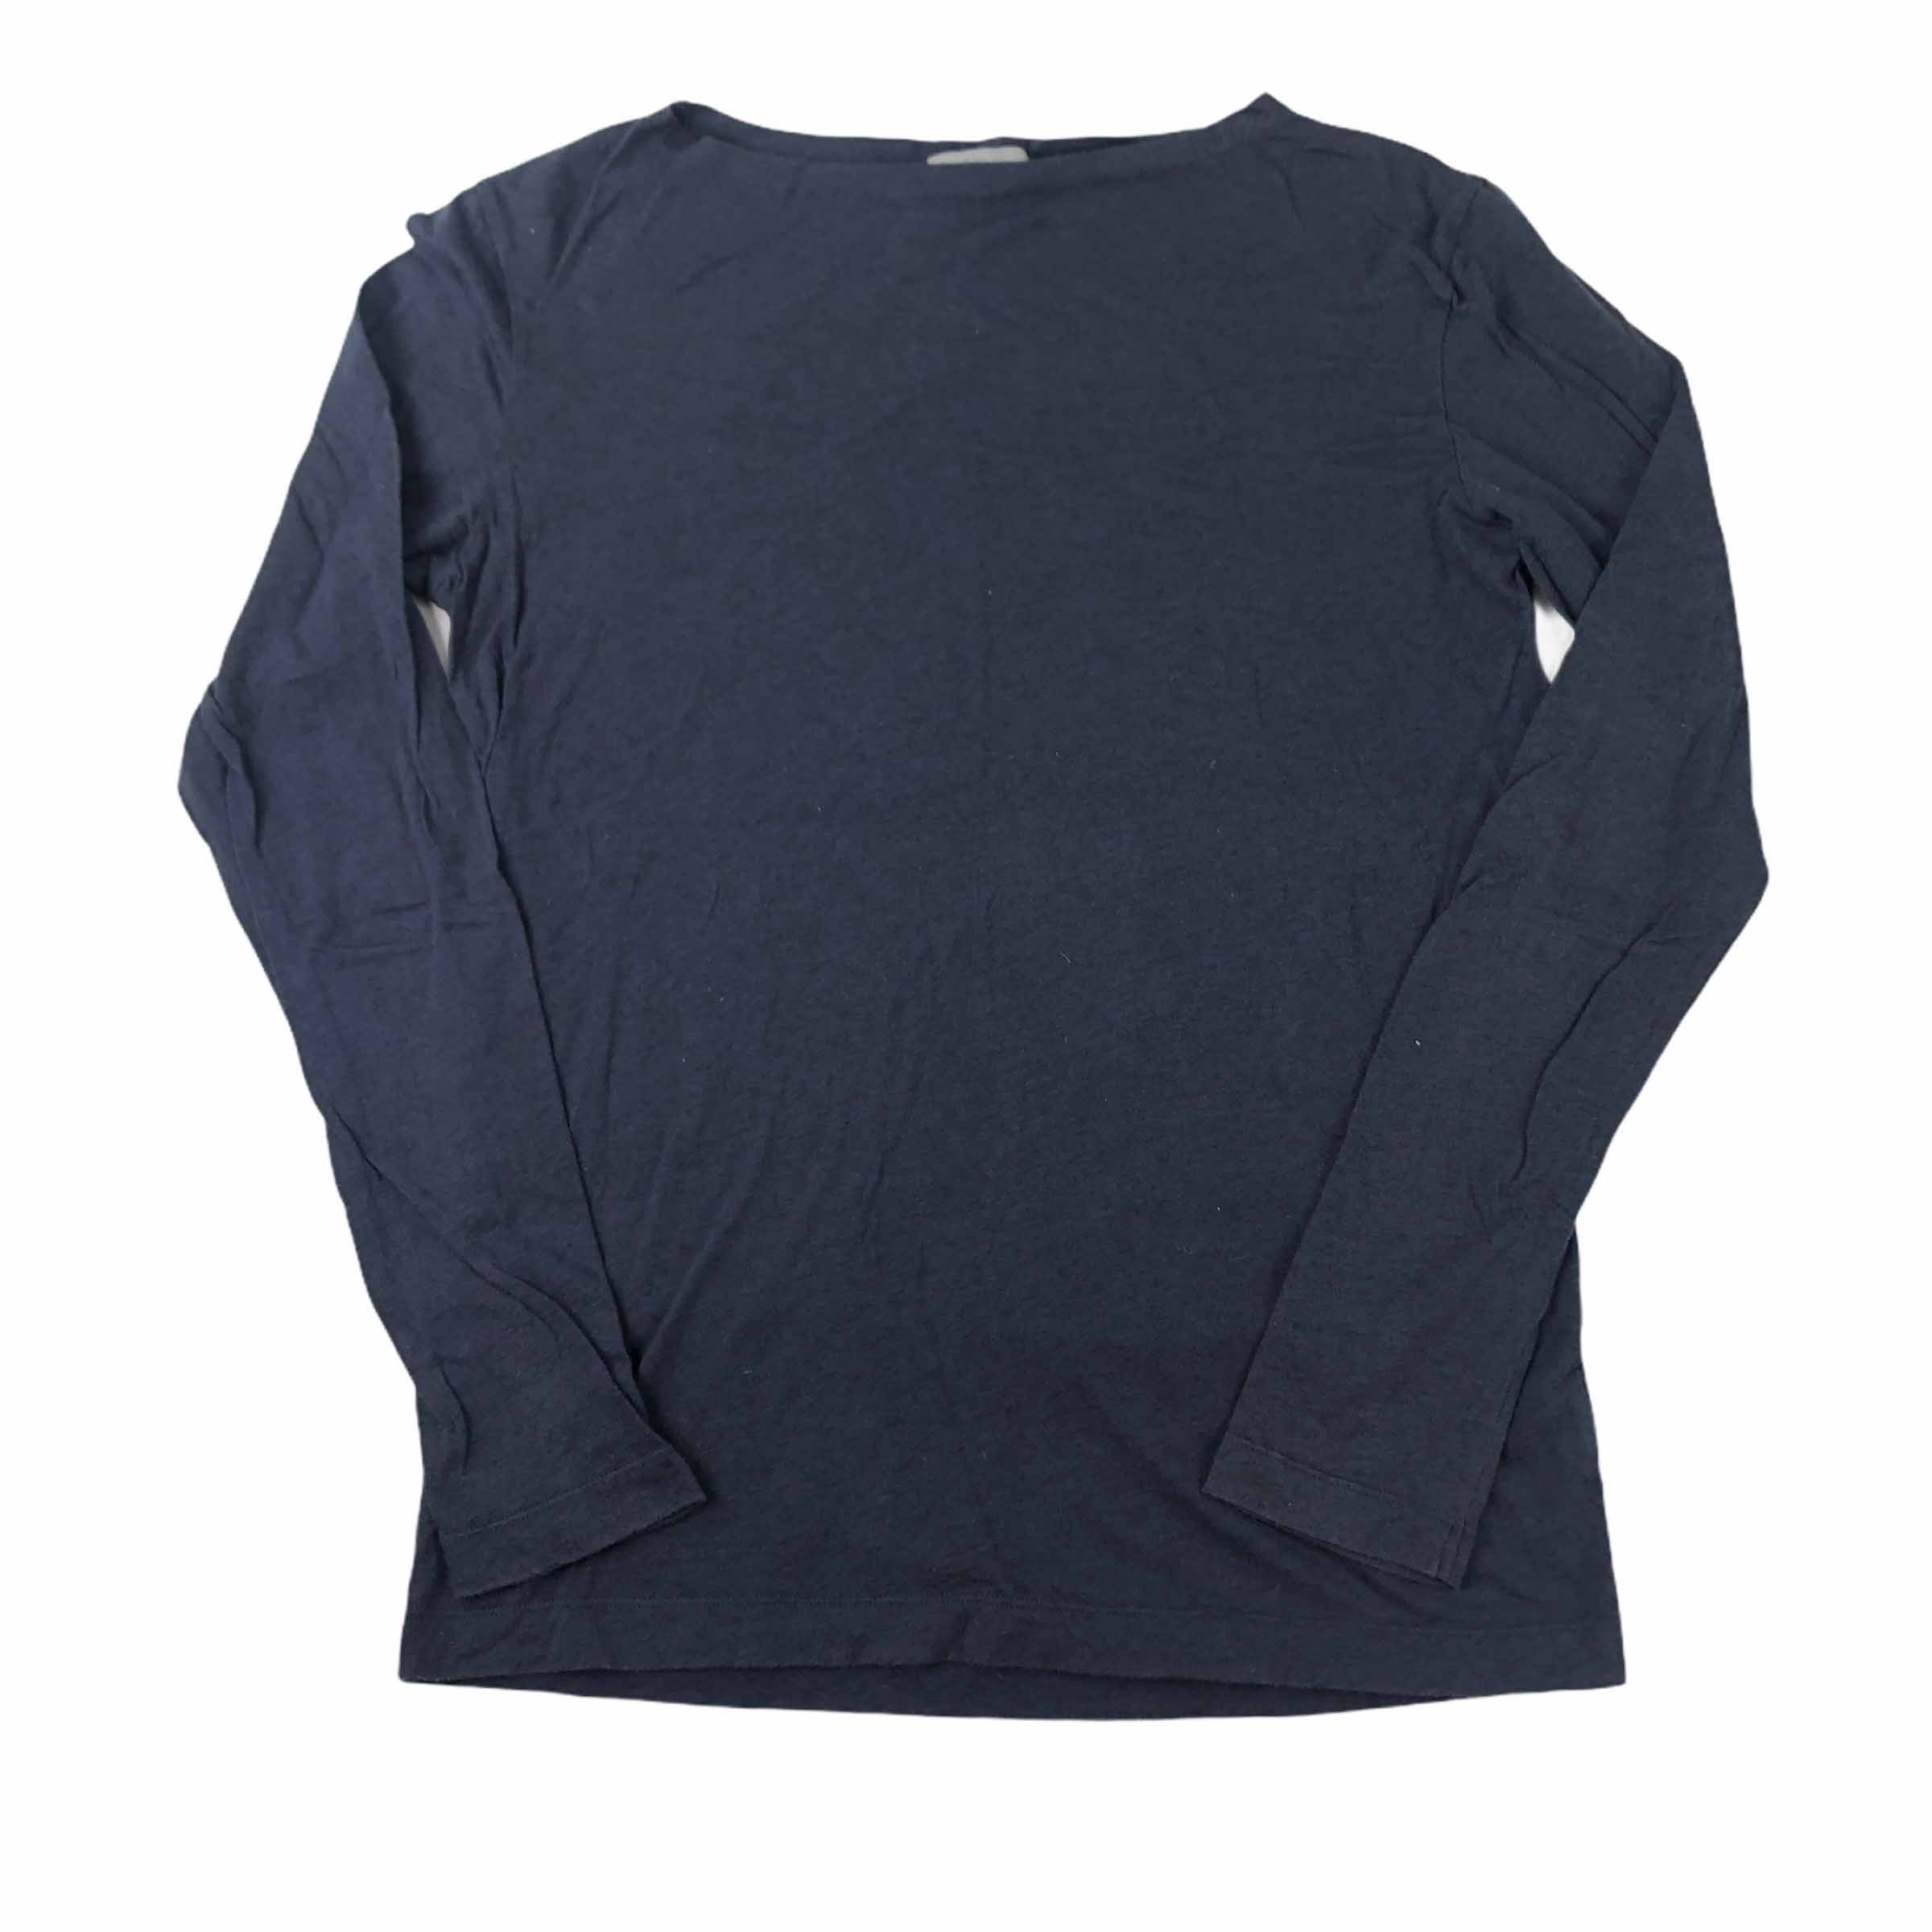 [Cos] Navy Long Sleeve - Size S